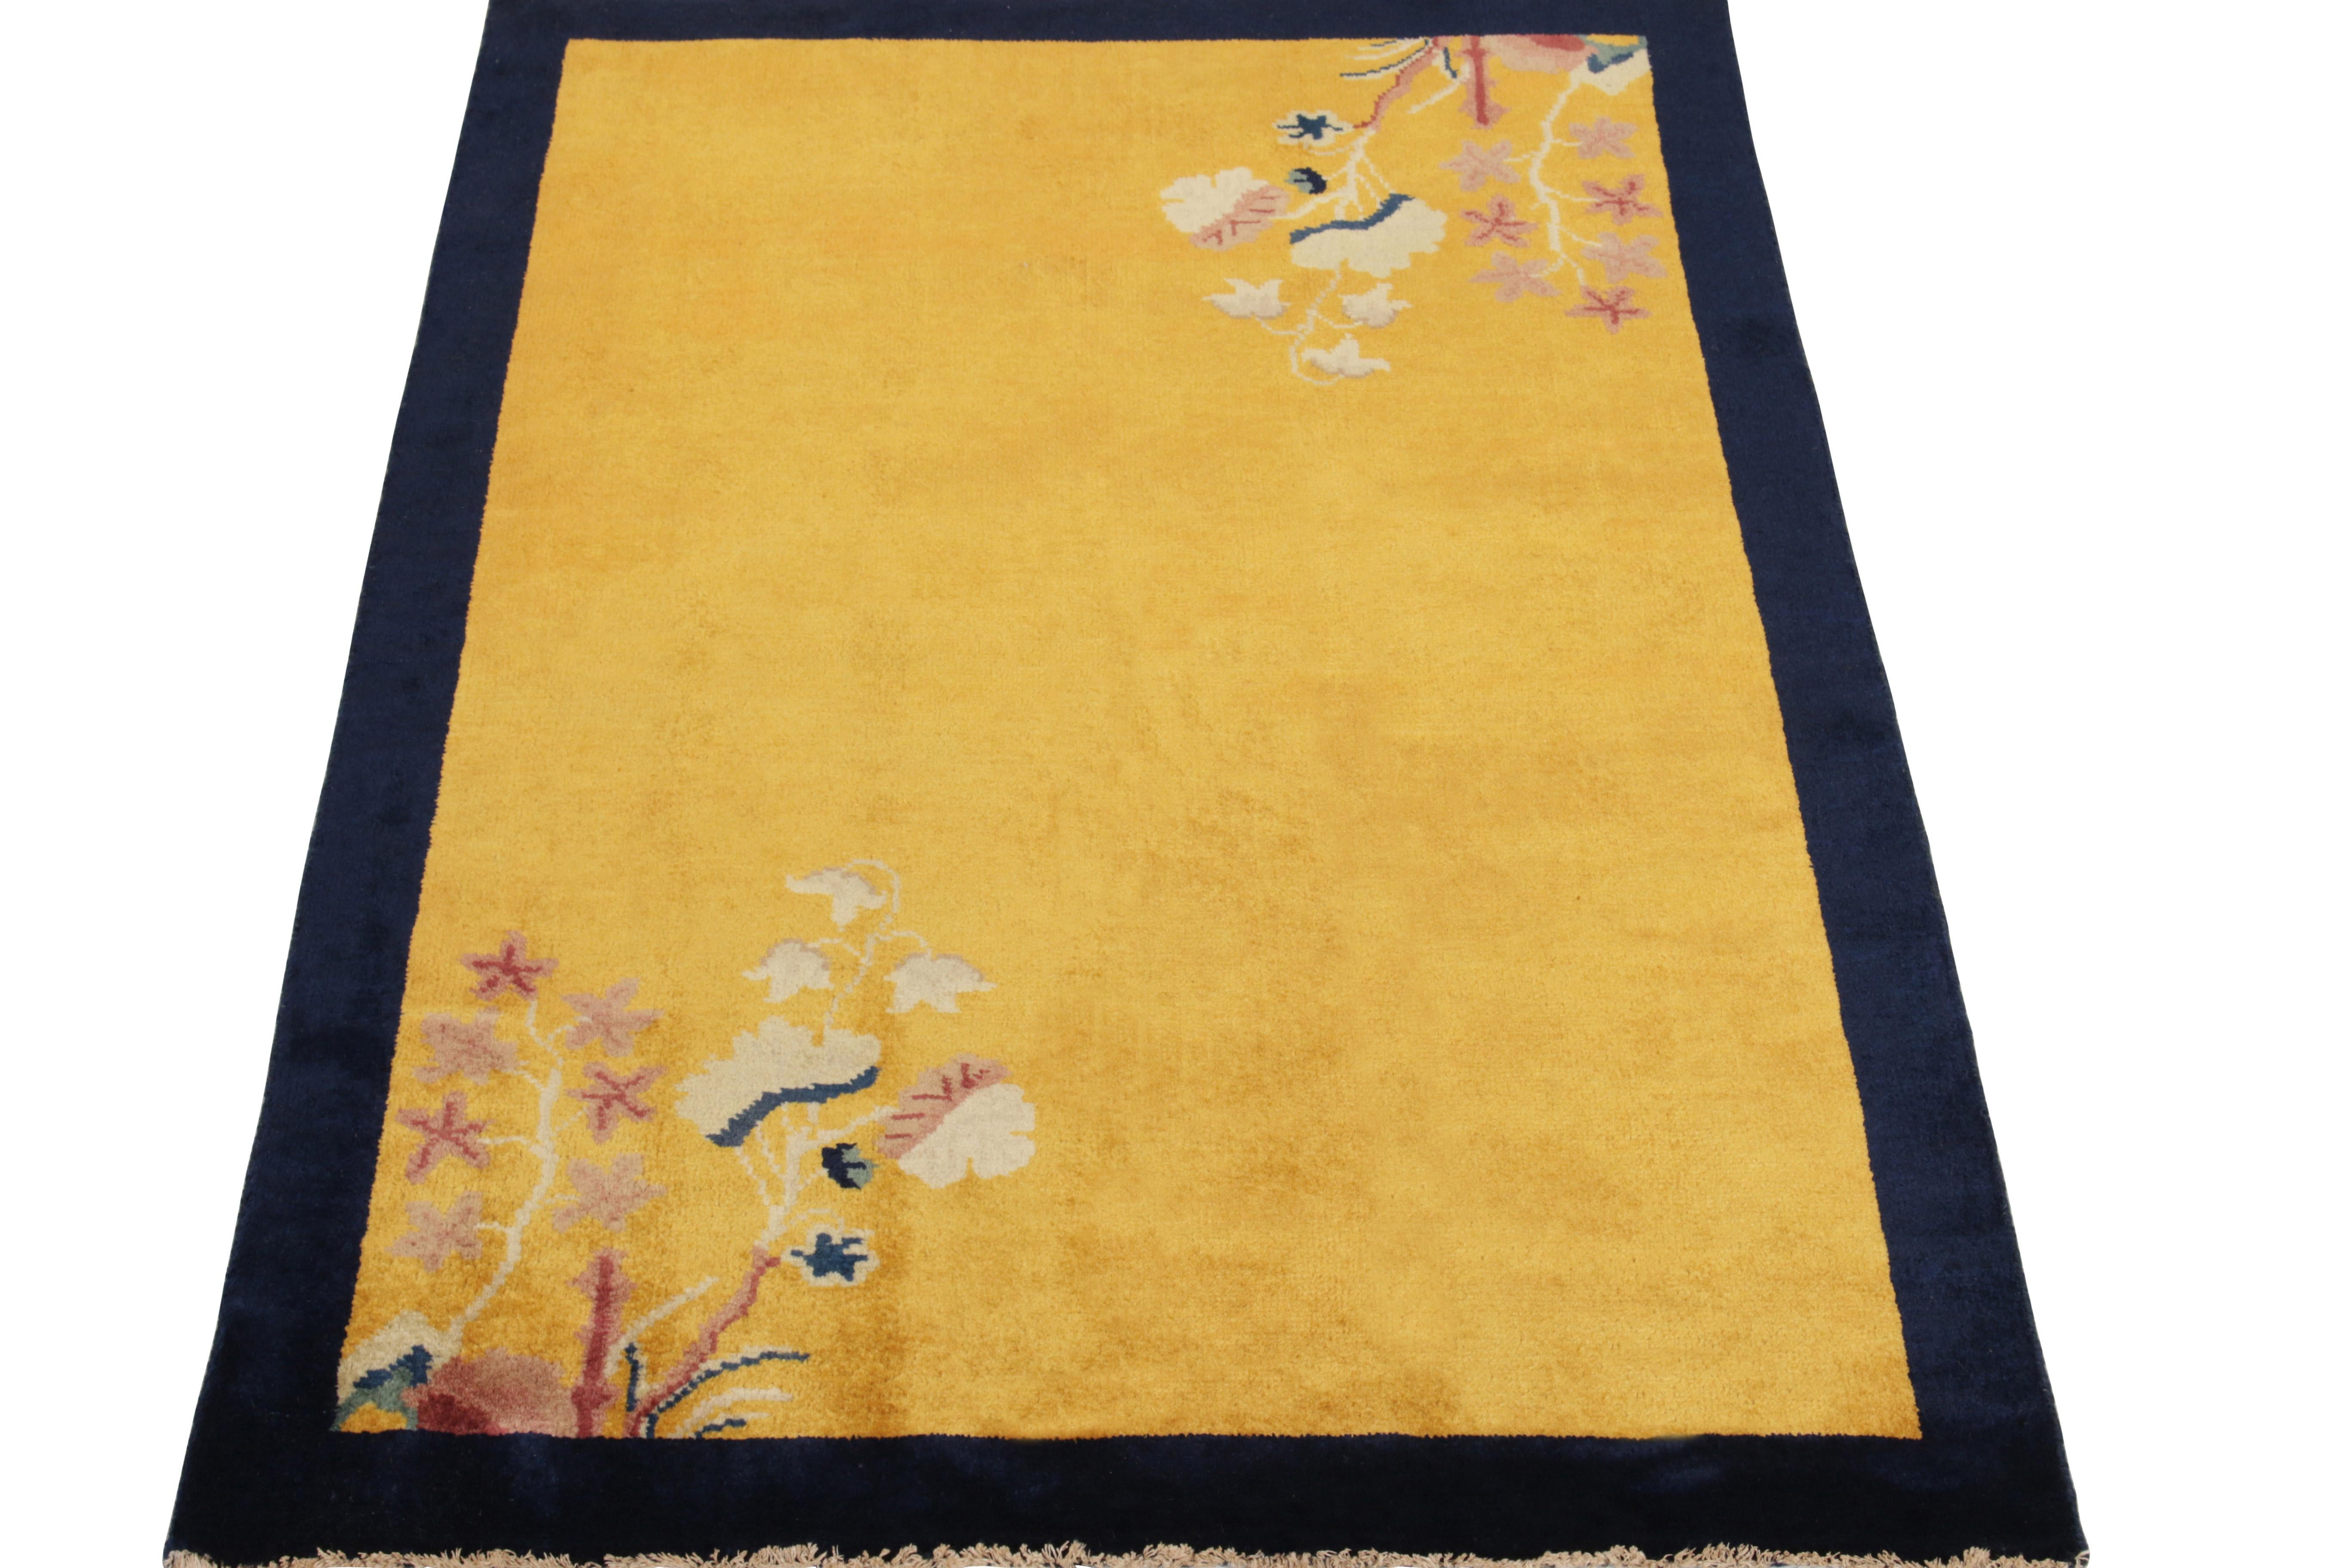 Hand-knotted in wool, this 3x5 vintage ode to Chinese art deco rugs of the 1920s features flowers flourishing in variegated tones of pastel pink, royal blue & off white in diagonal corners of the inner border highlighting the minimalist approach in